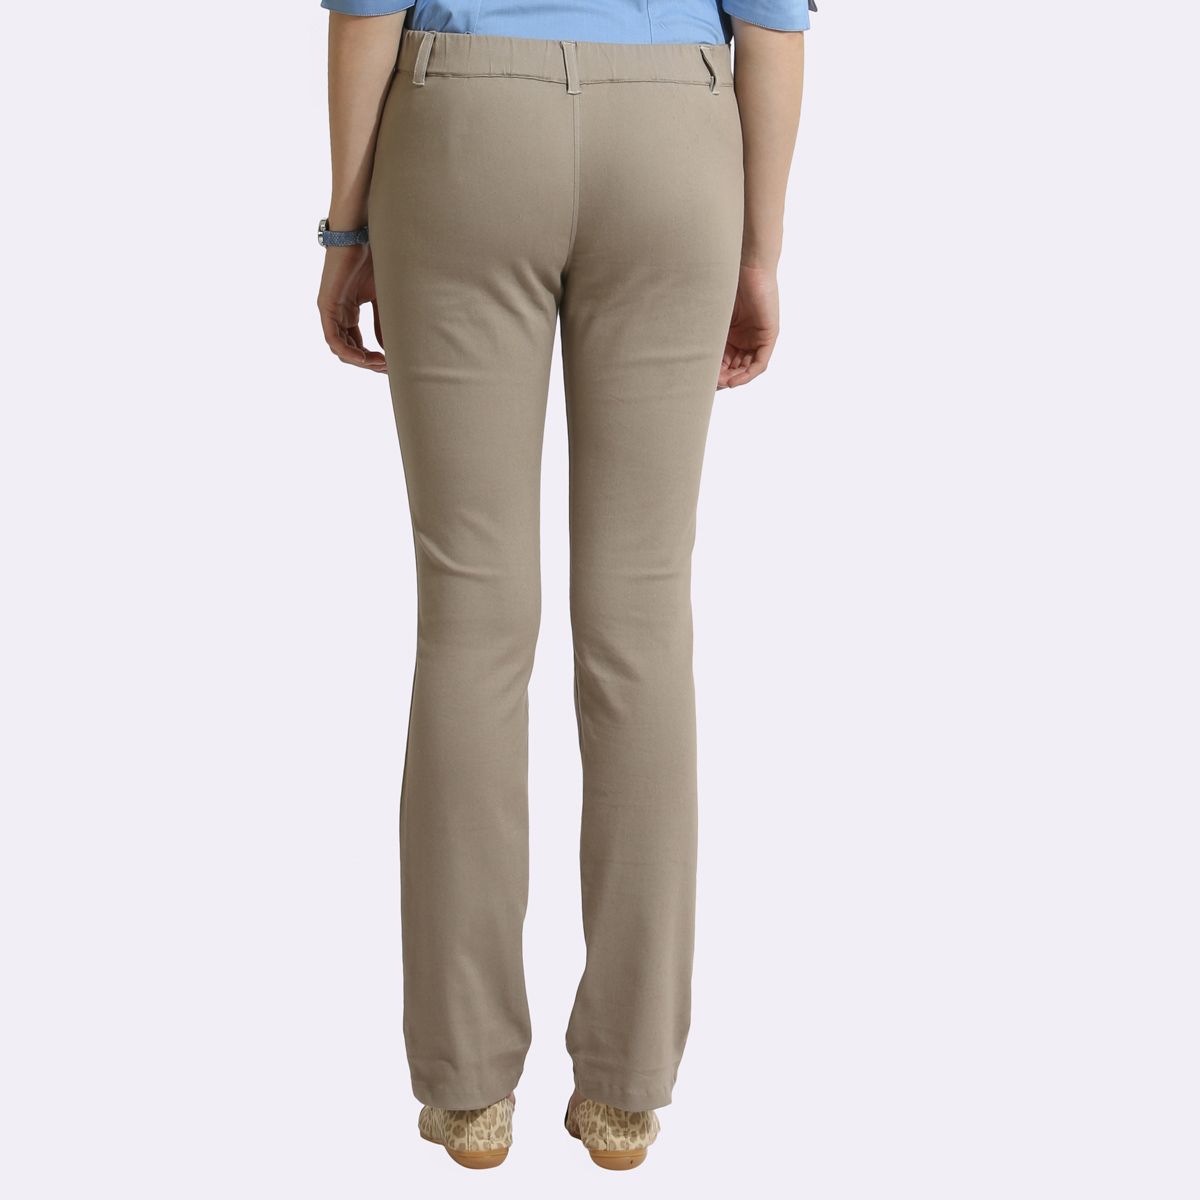 The Elasto Pants Cotton Super Stretch Pull On Light Brown